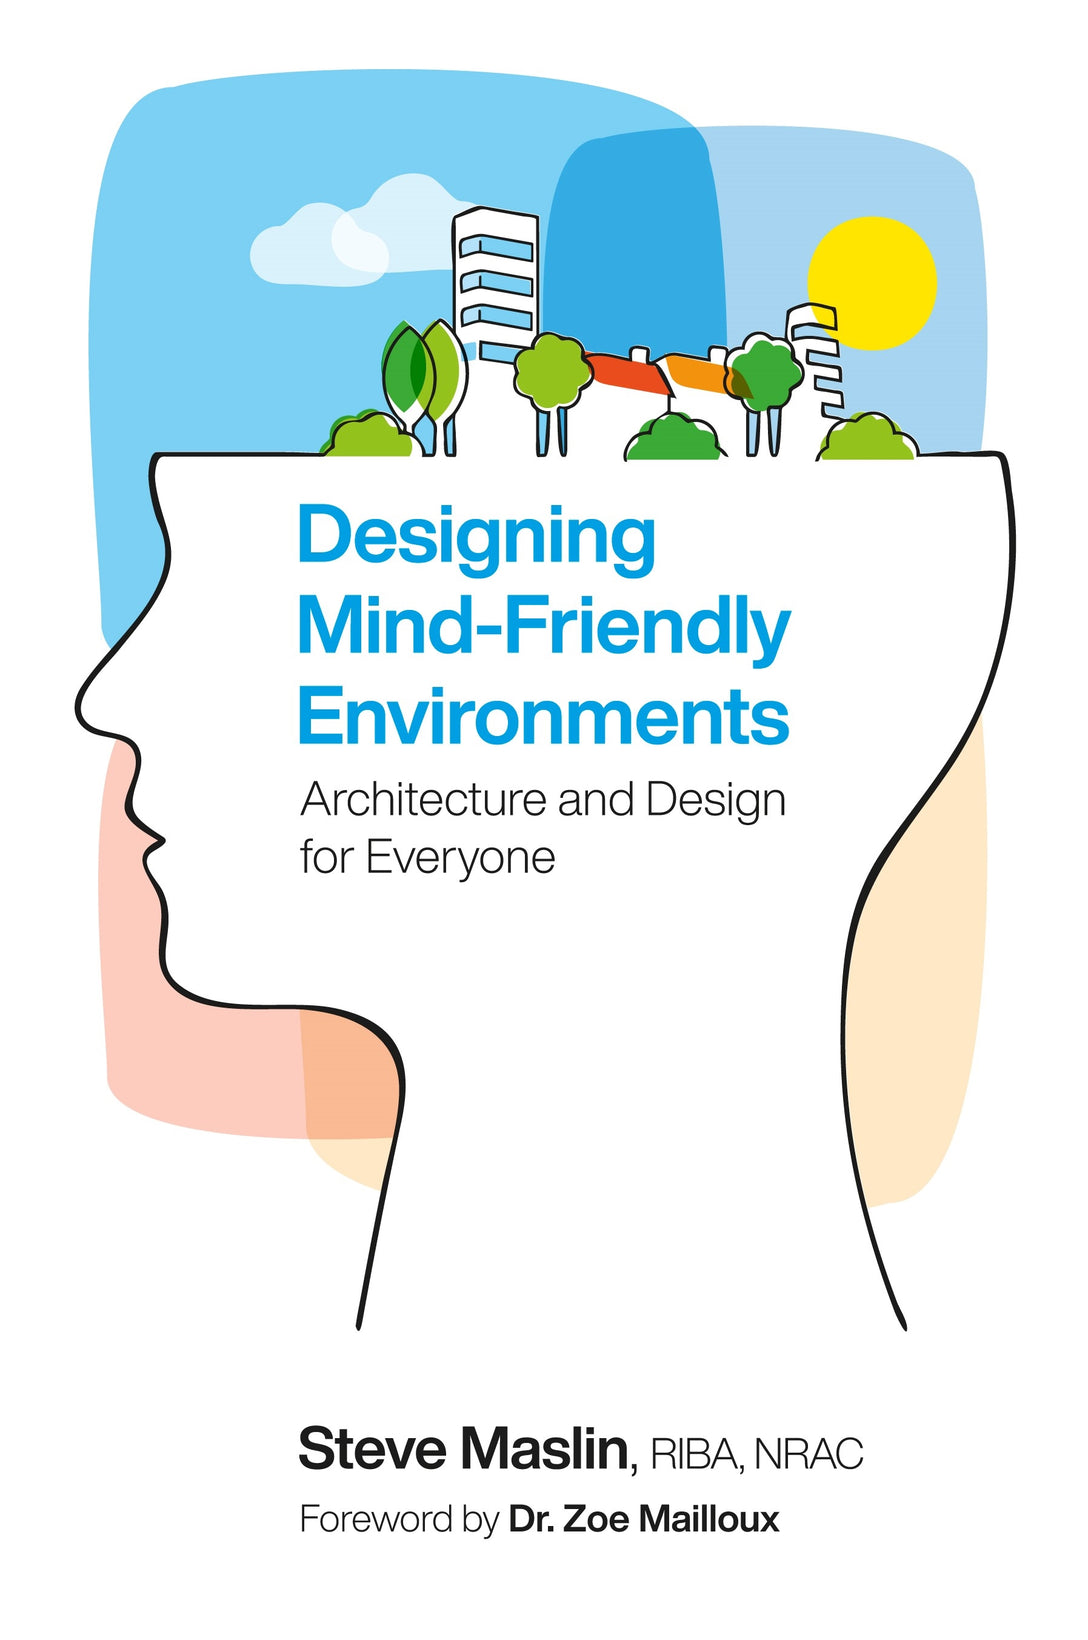 Designing Mind-Friendly Environments by Zoe Mailloux, Steve Maslin